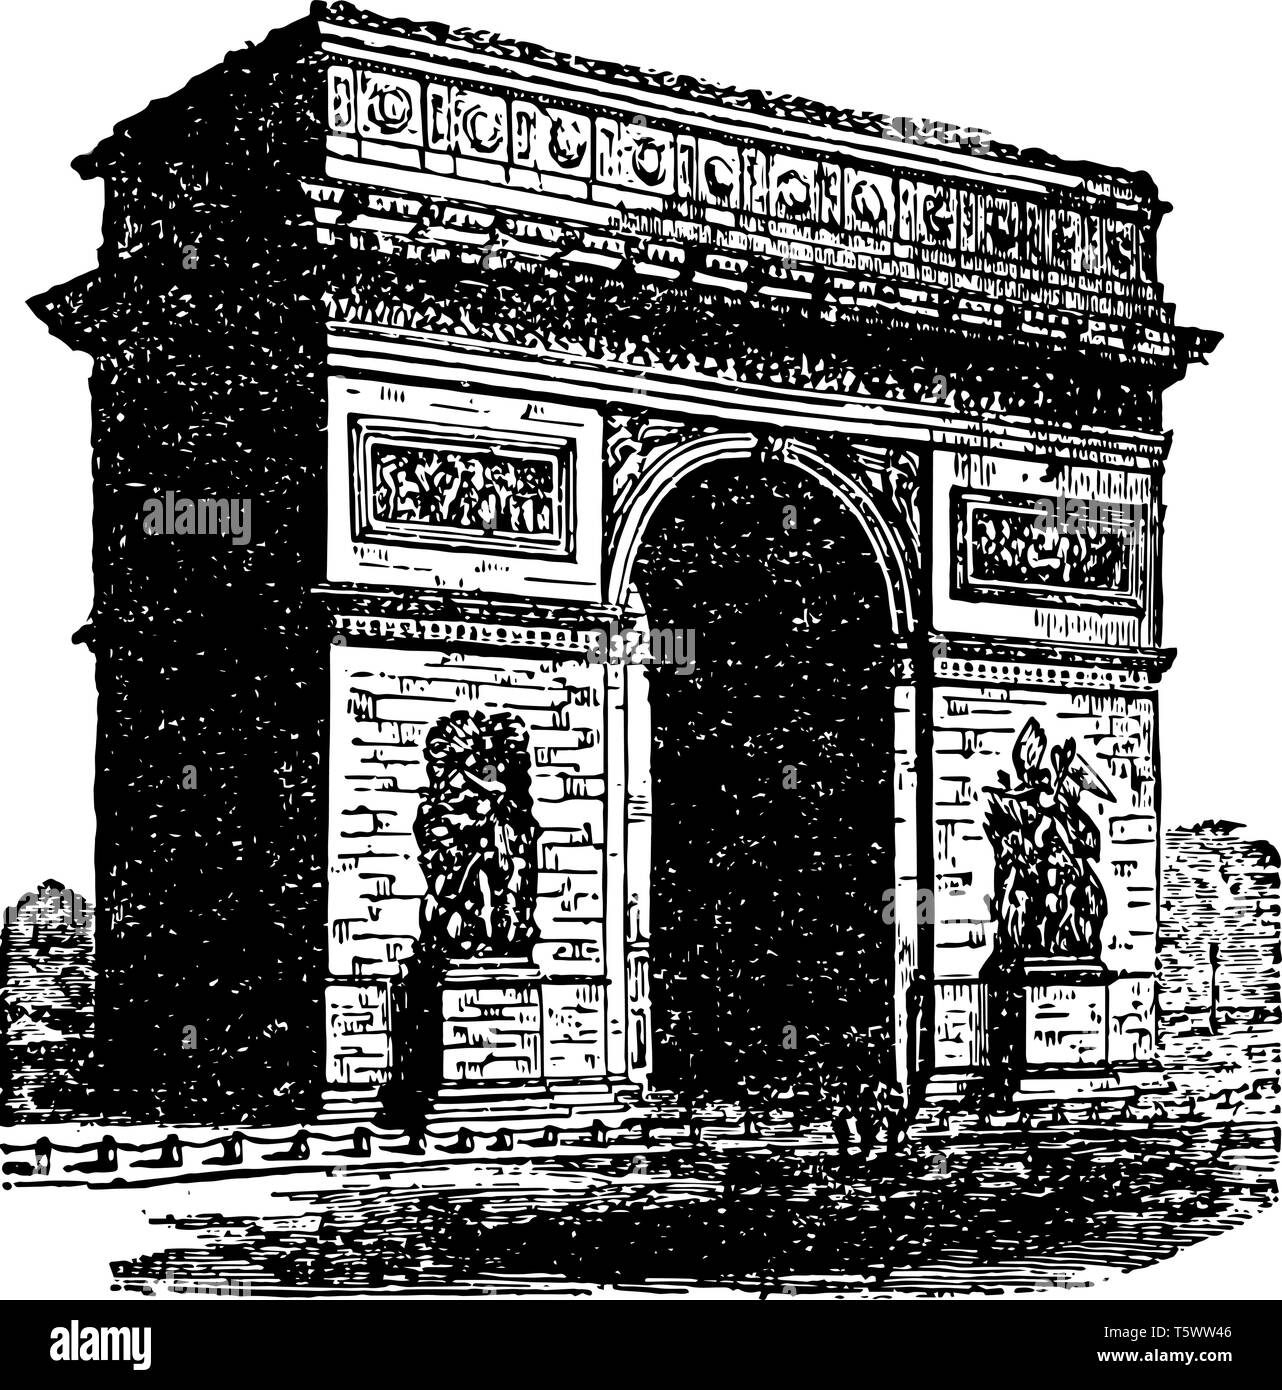 Arch of Triumph is the shape of a monumental archway building gates walls sizes vintage line drawing or engraving illustration Stock Vector